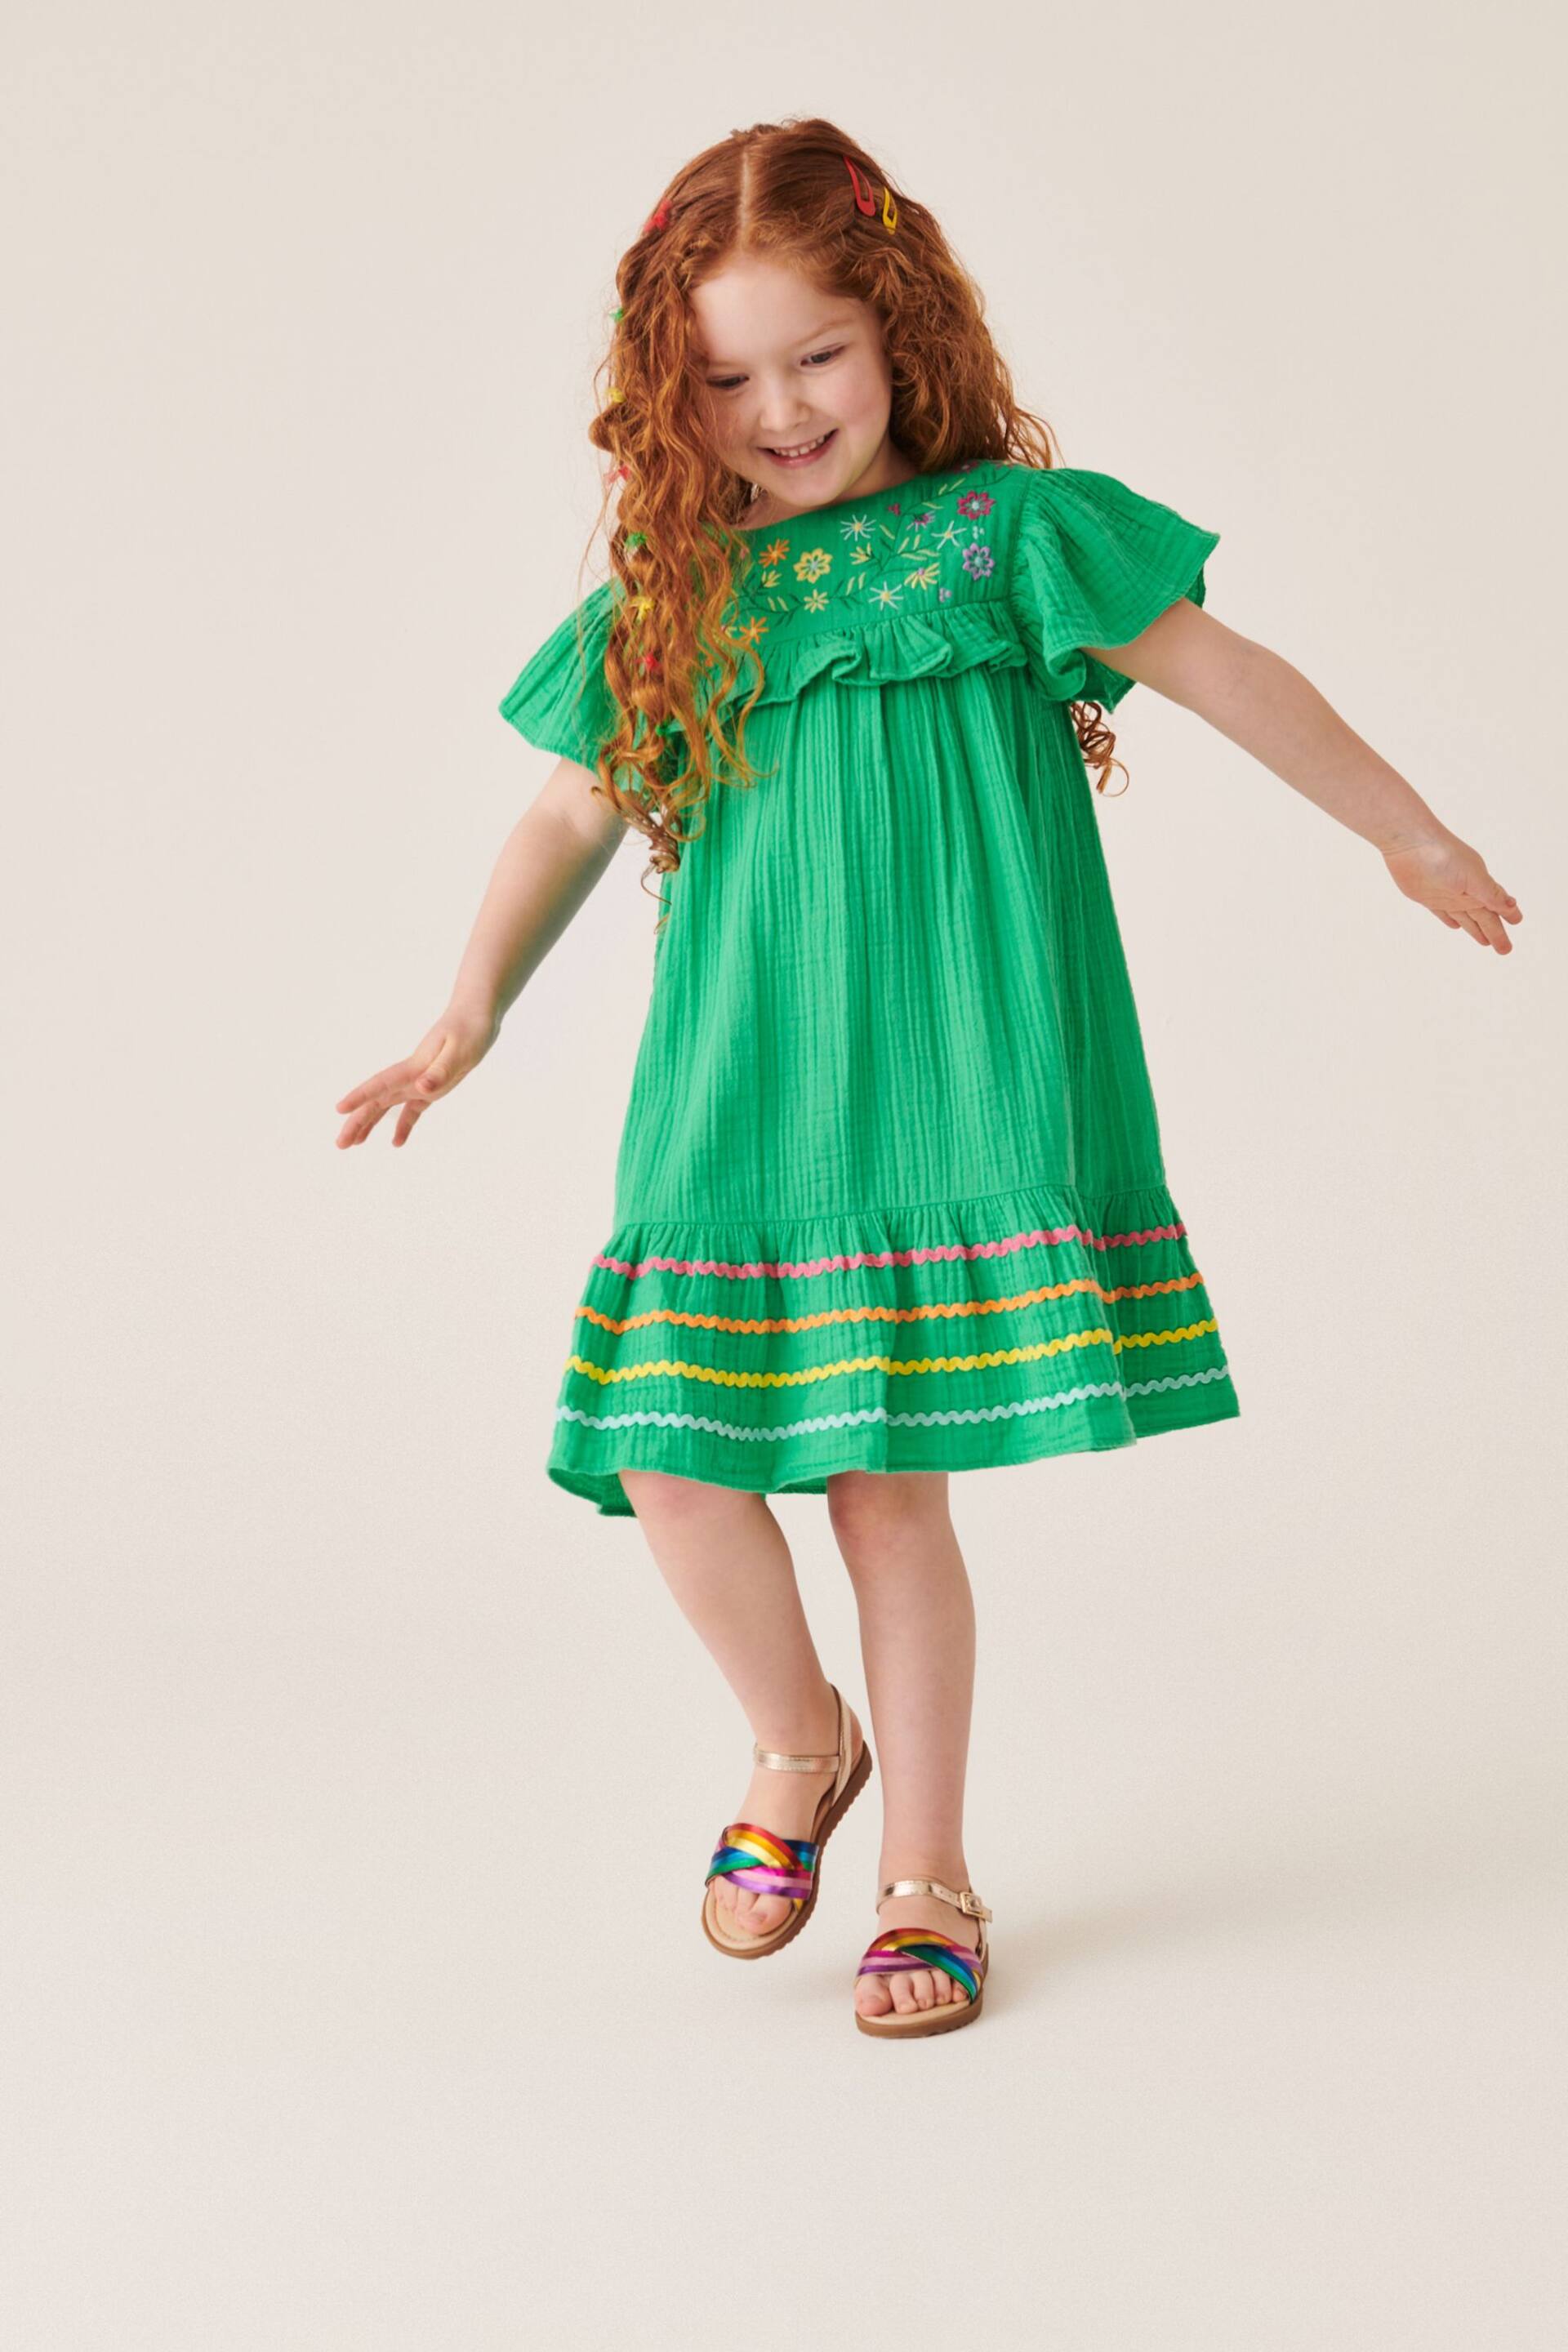 Little Bird by Jools Oliver Green Floral Embroidered Frill Dress - Image 1 of 6